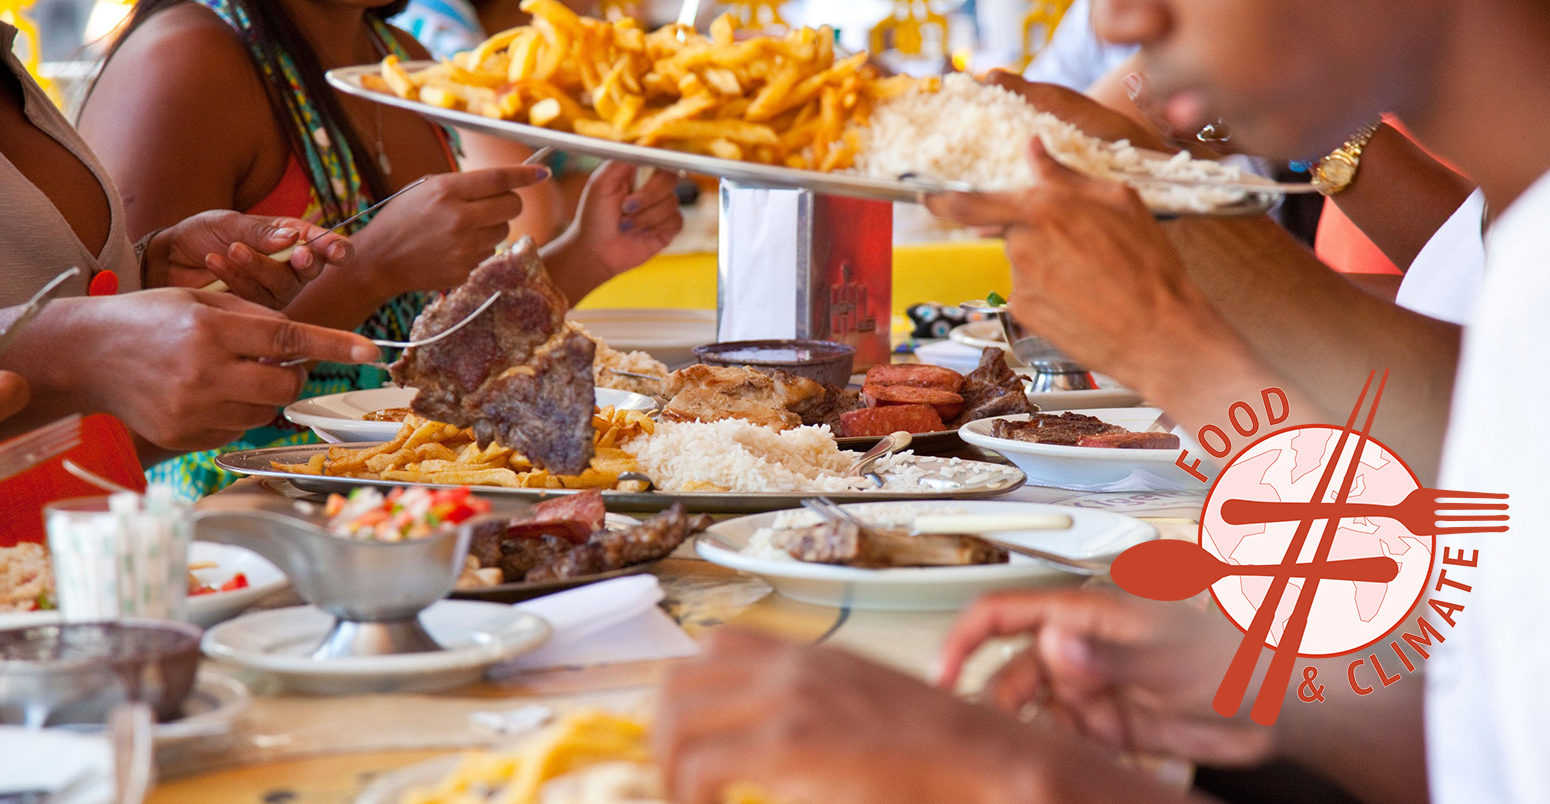 People eating steak and chips. Rio de Janeiro, Brazil. Credit: DB Images / Alamy Stock Photo.